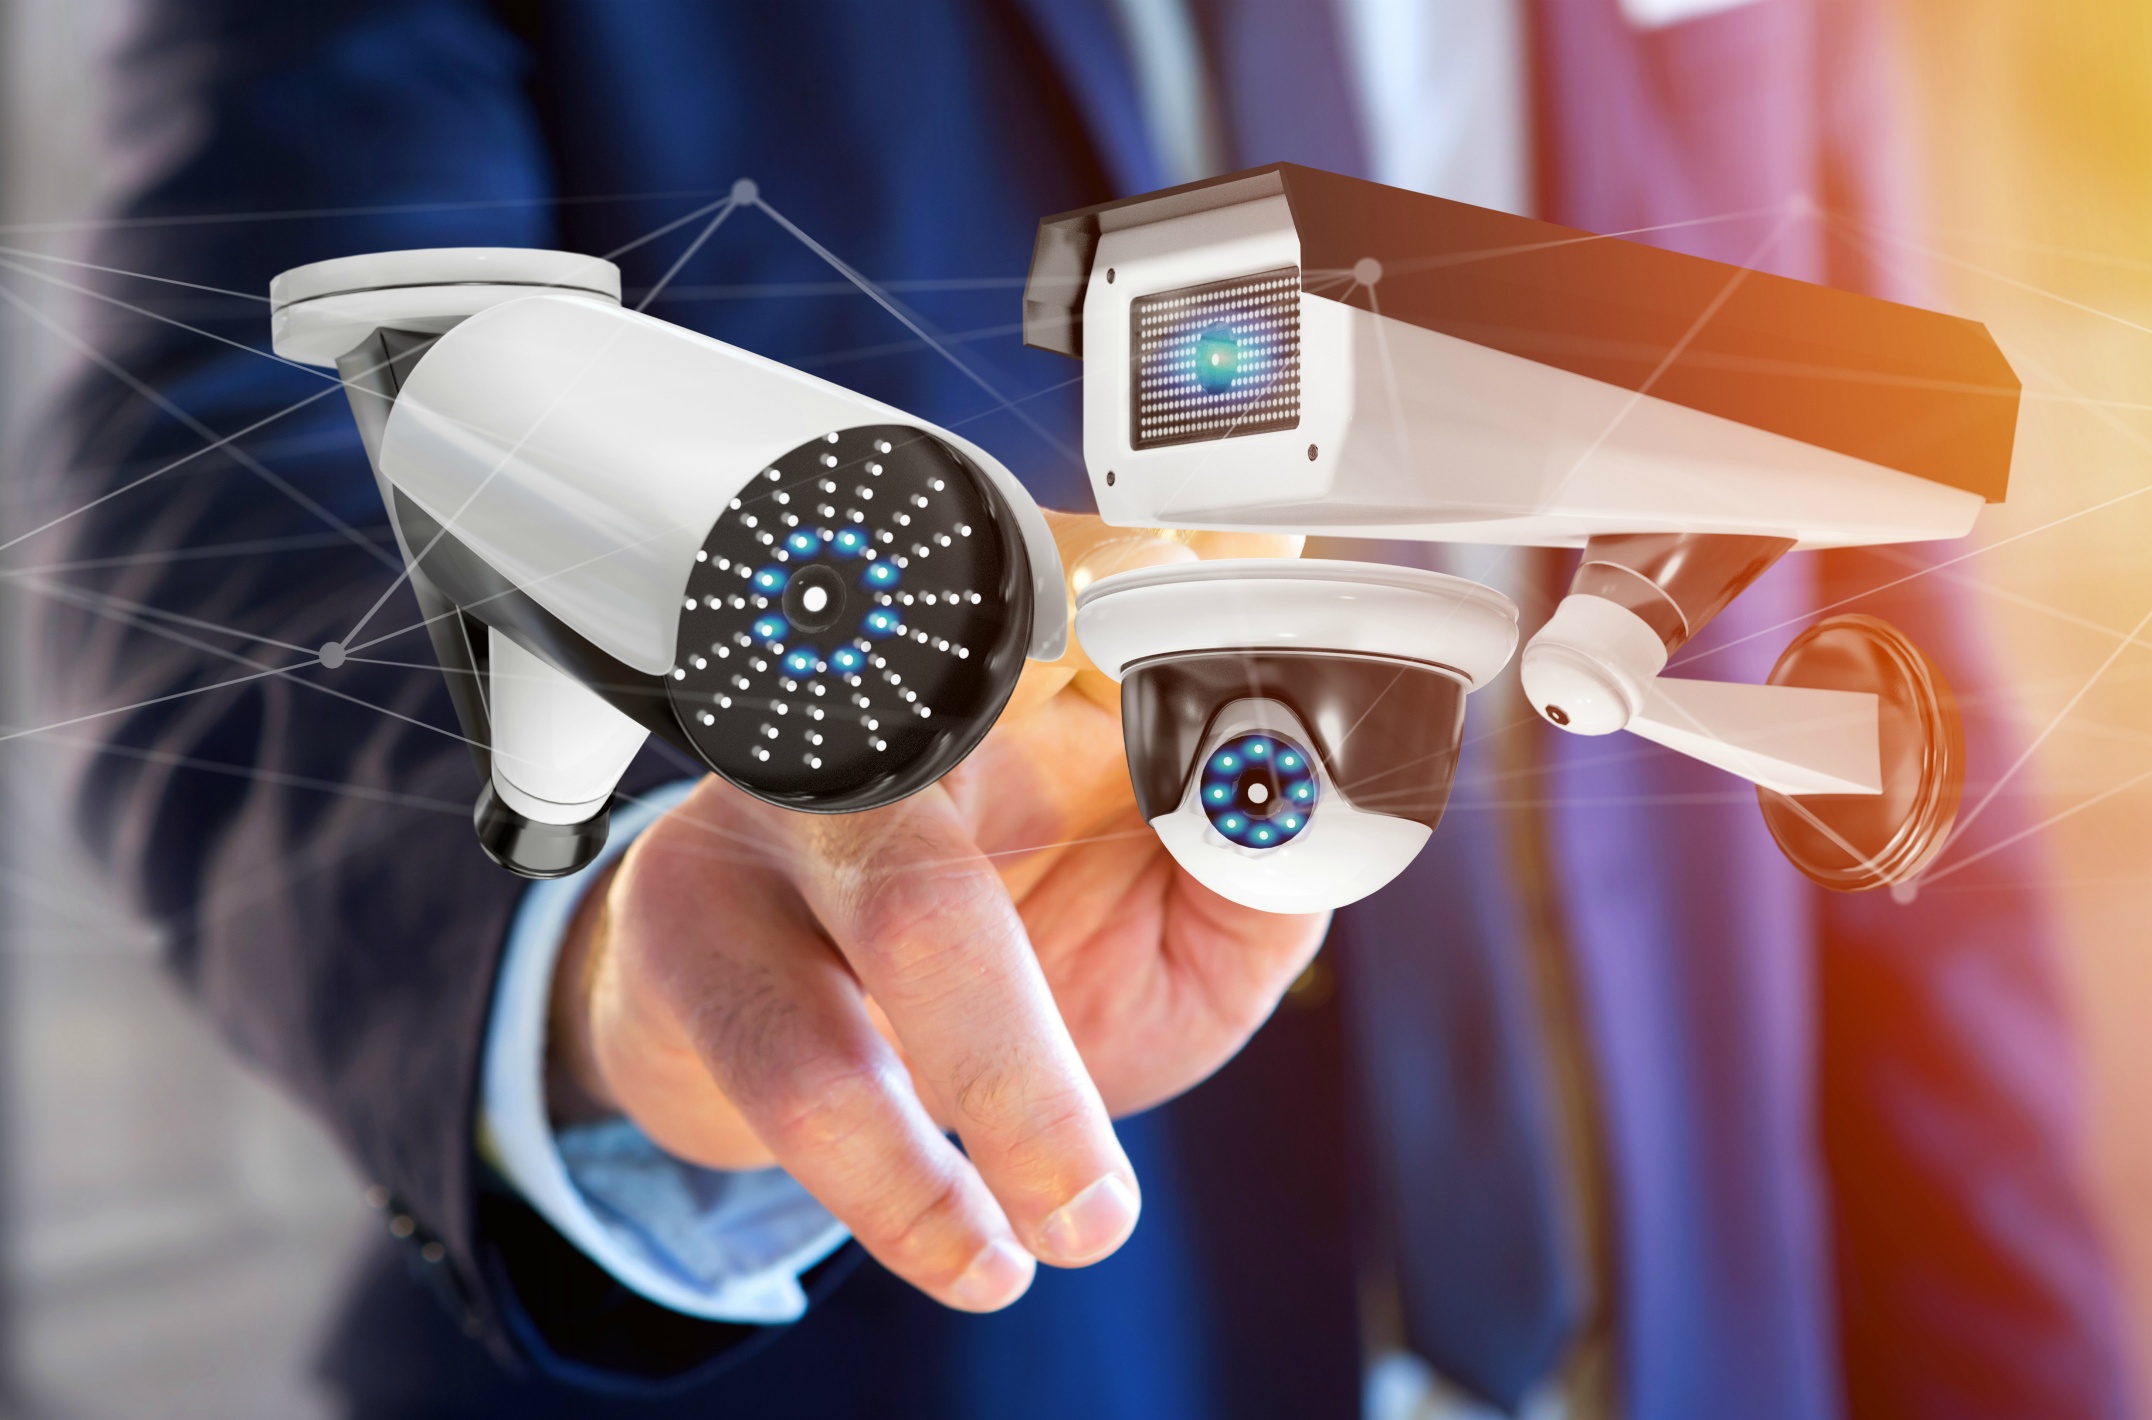 businessman-holding-security-camera-system-network-connection-3d-rendering